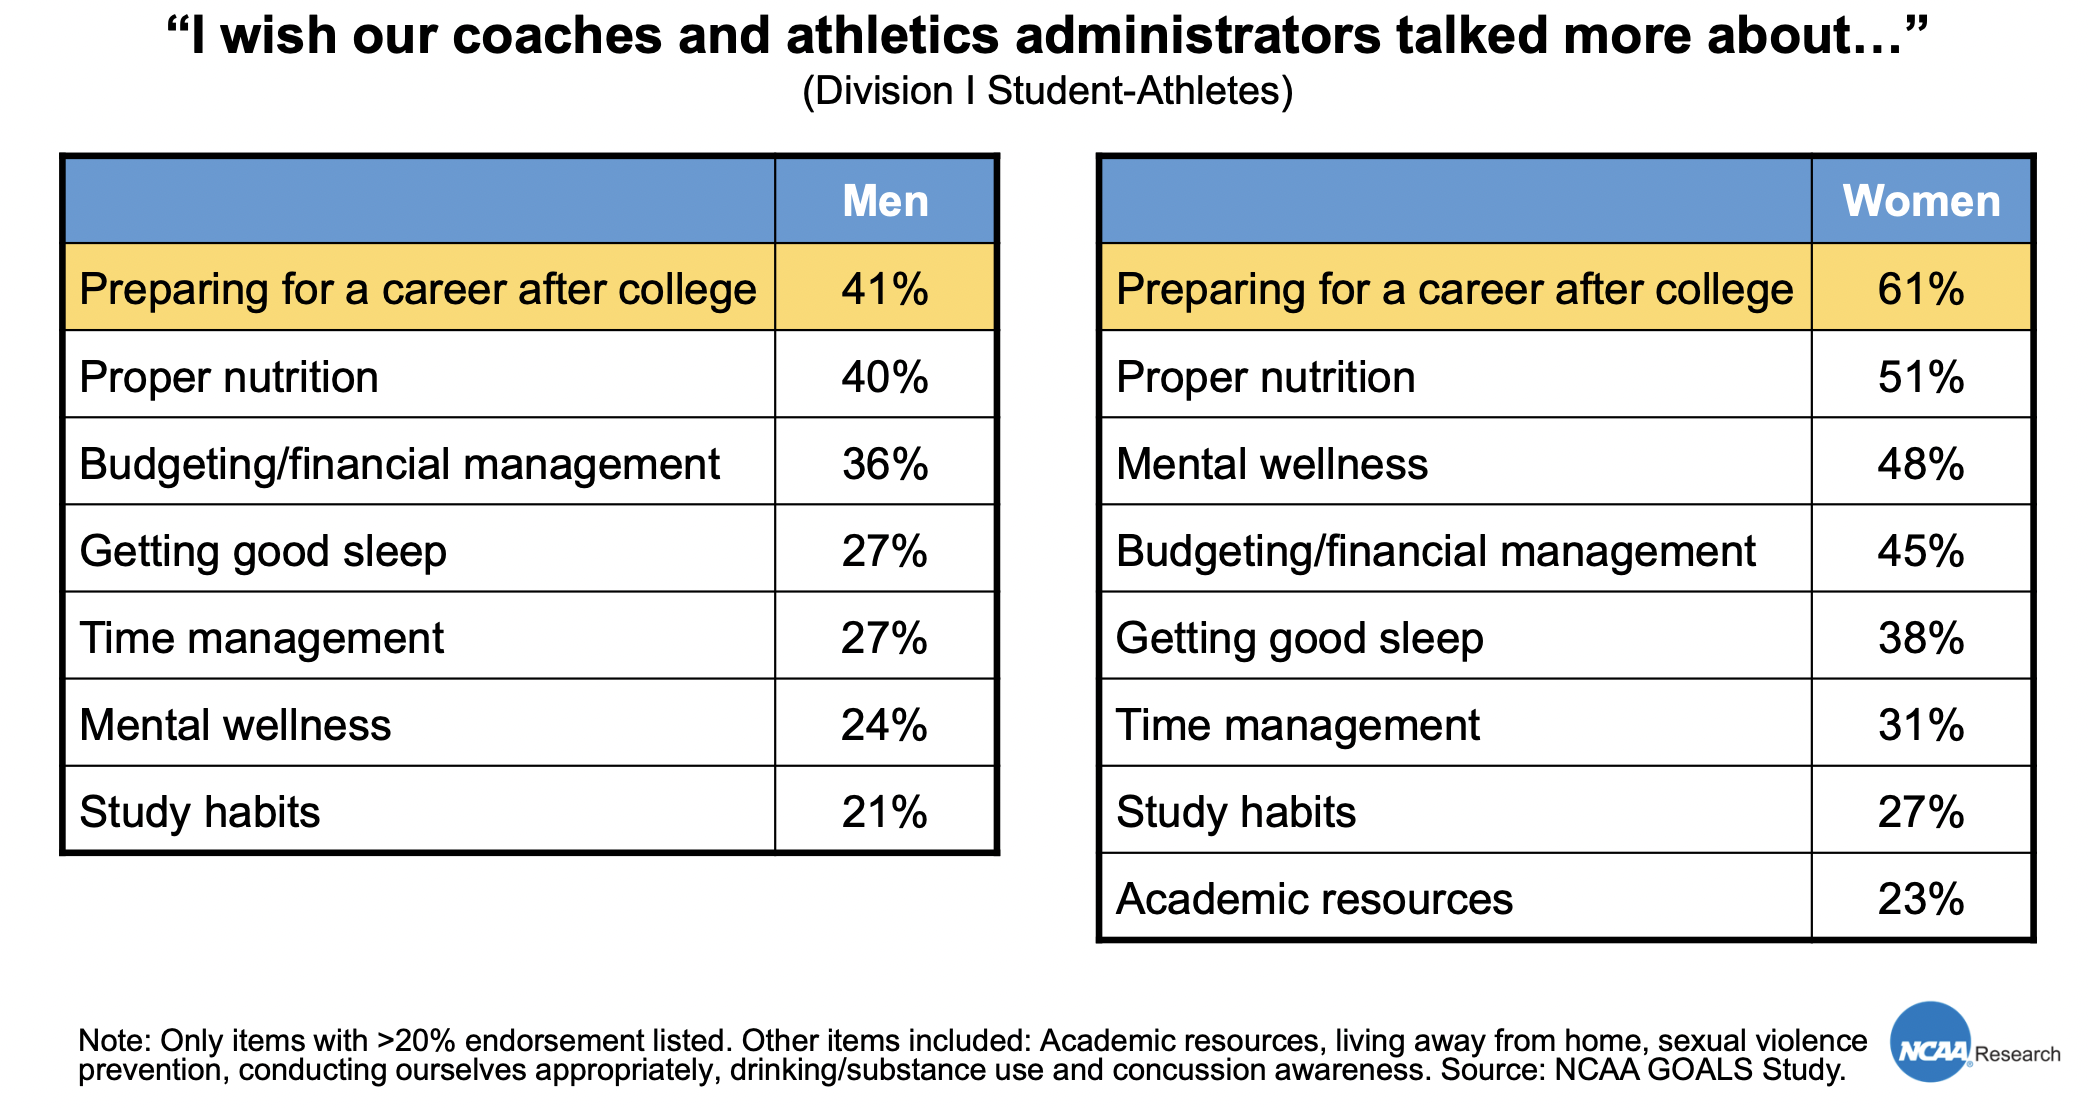 Things student athletes wish their coaches talked more about